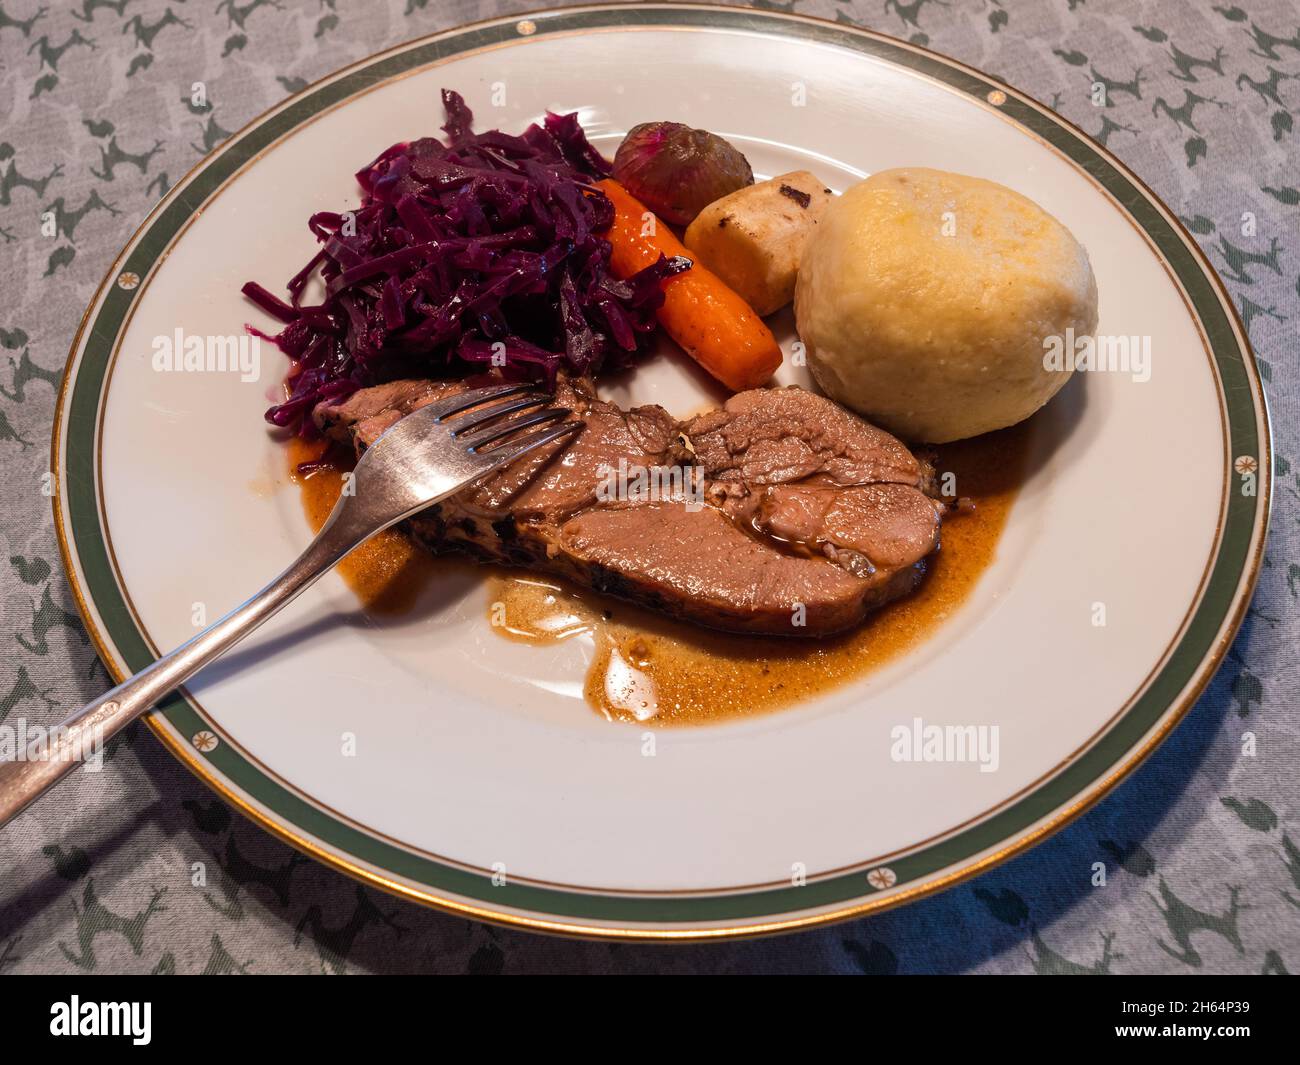 Slice of Roast Young Wild Boar Piglet with Red Cabbage, Potato Dumpling, Winter Vegetables and Gravy Stock Photo